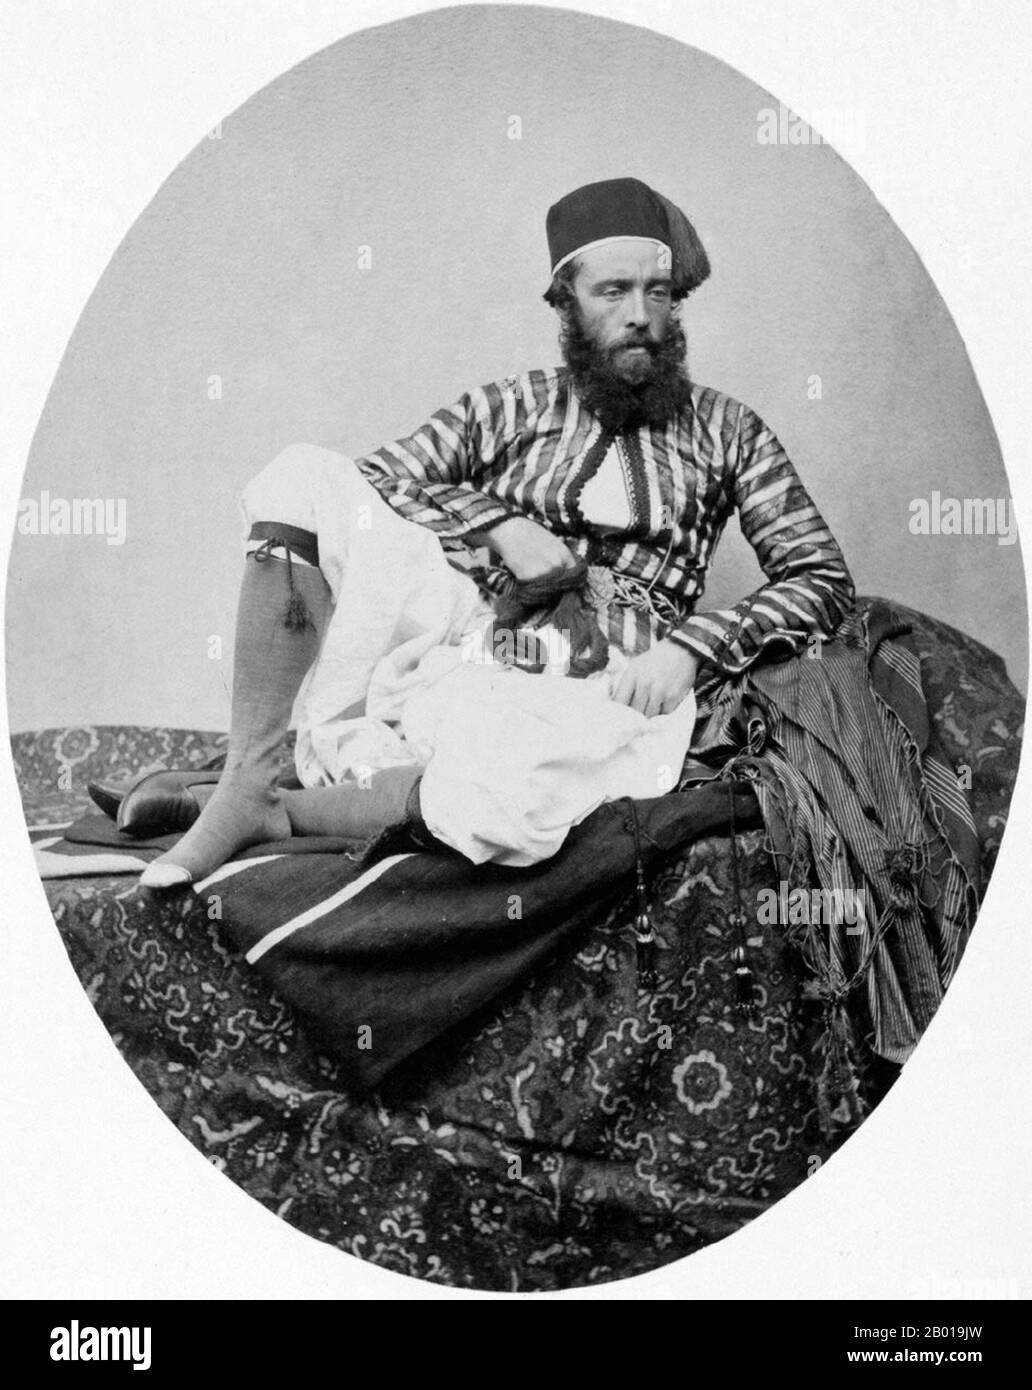 England: Francis Frith (31 October 1822 - 25 February 1898), self-portrait in Middle Eastern costume, c. 1857.  Francis Frith, also spelled Frances Frith, was an English photographer of the Middle East and many towns in the United Kingdom. In 1850, he started a photographic studio known as Frith & Hayward in Liverpool. A successful grocer, and later, printer, Frith fostered an interest in photography, becoming a founding member of the Liverpool Photographic Society in 1853. He journeyed to the Middle East on three occasions, the first being a trip to Egypt in 1856. Stock Photo